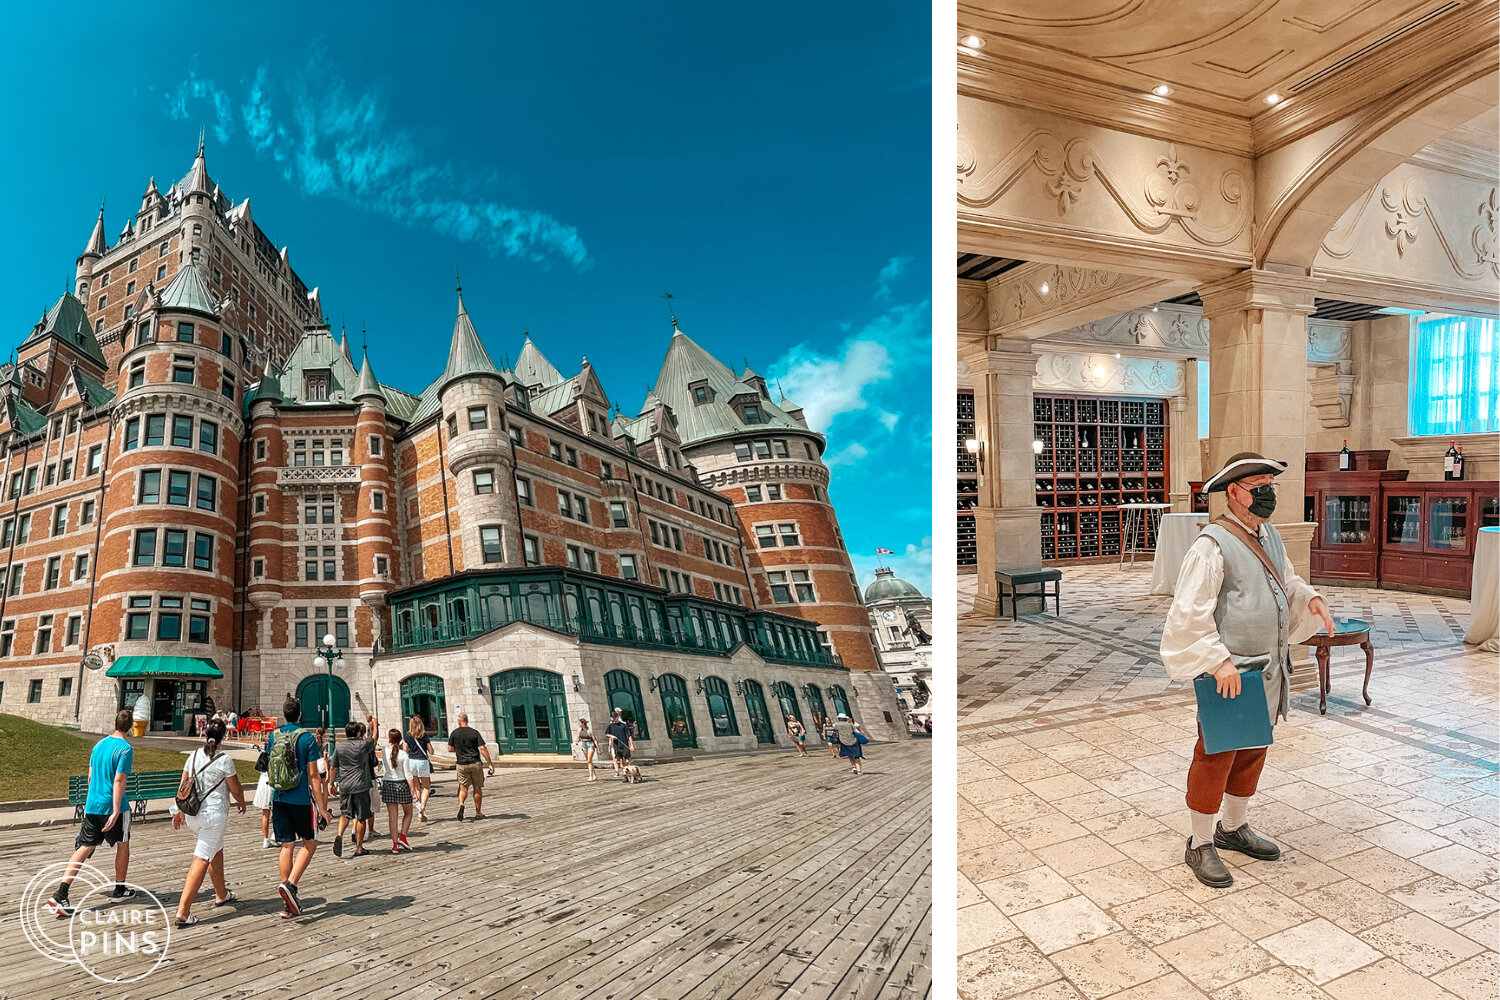 Guided Tour of the Fairmont Chateau Frontenac Hotel in Quebec City - Tour Review